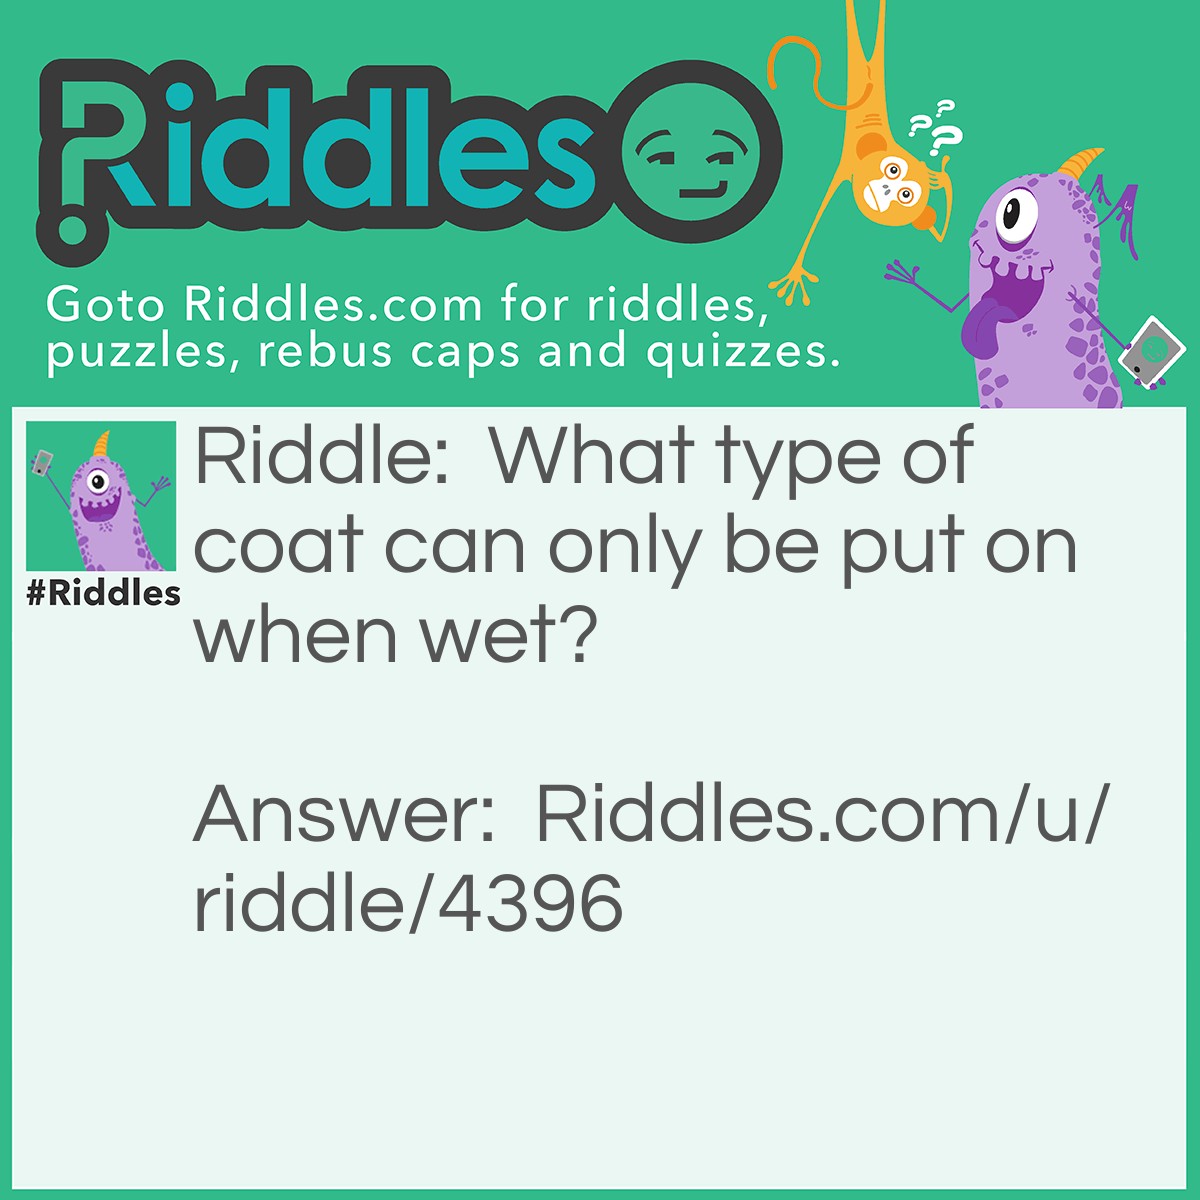 Riddle: What type of coat can only be put on when wet? Answer: A coat of paint.